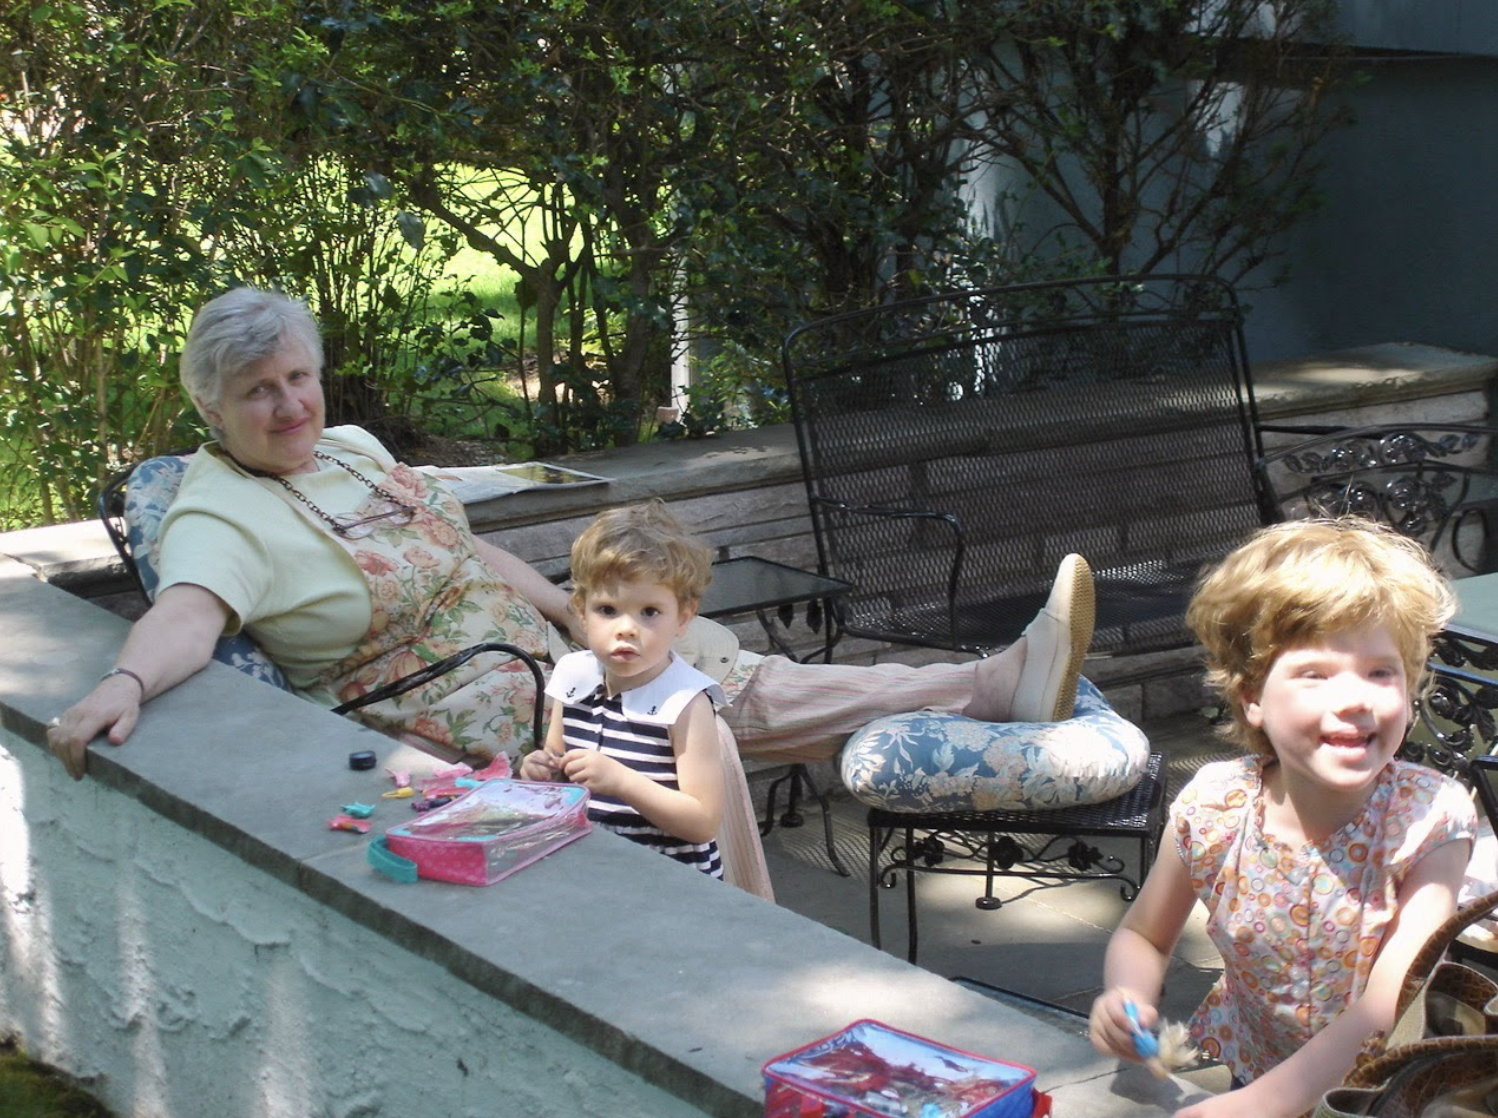 (PHOTO: Sally Lee sitting with her granddaughters, Beatrice and Madeleine Larzul, in the Allendale Drive house on July 31st, 2007.)